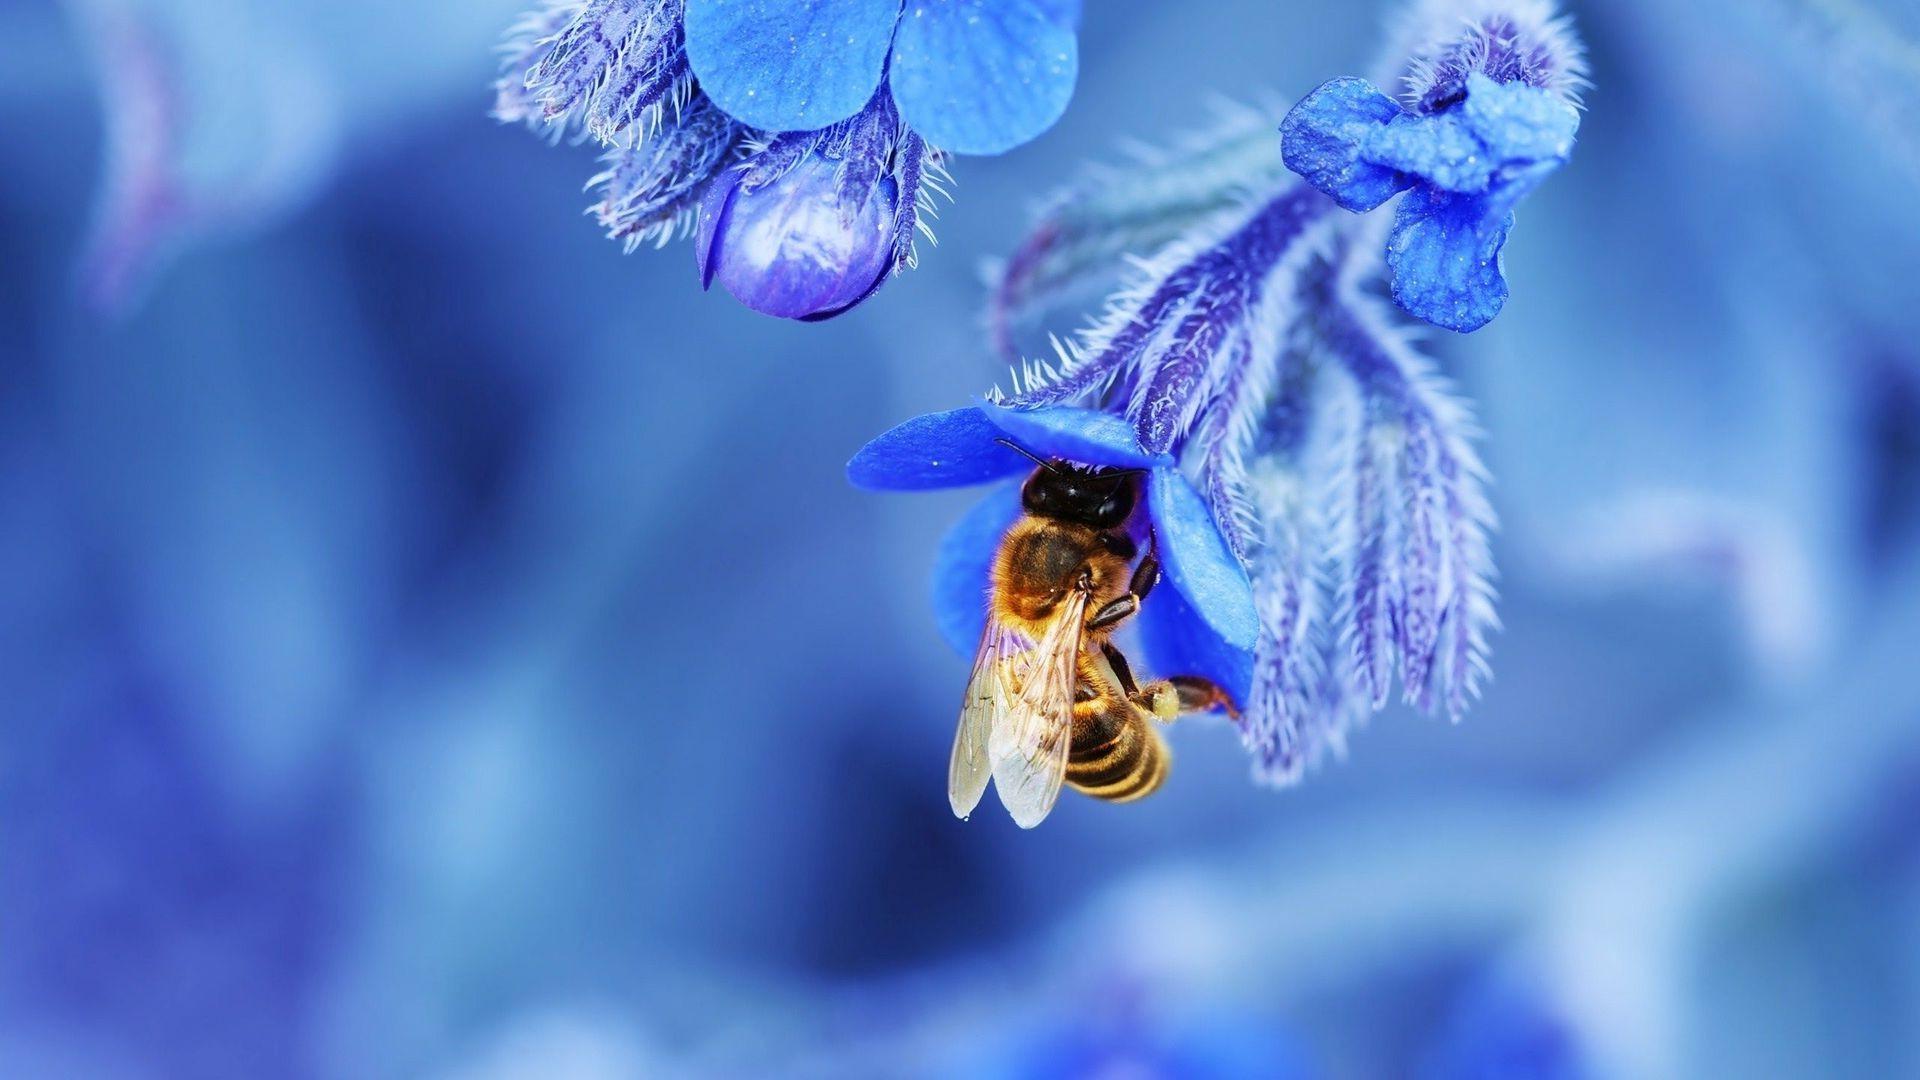 nature, Macro, Depth Of Field, Bees, Insect, Flowers, Blue